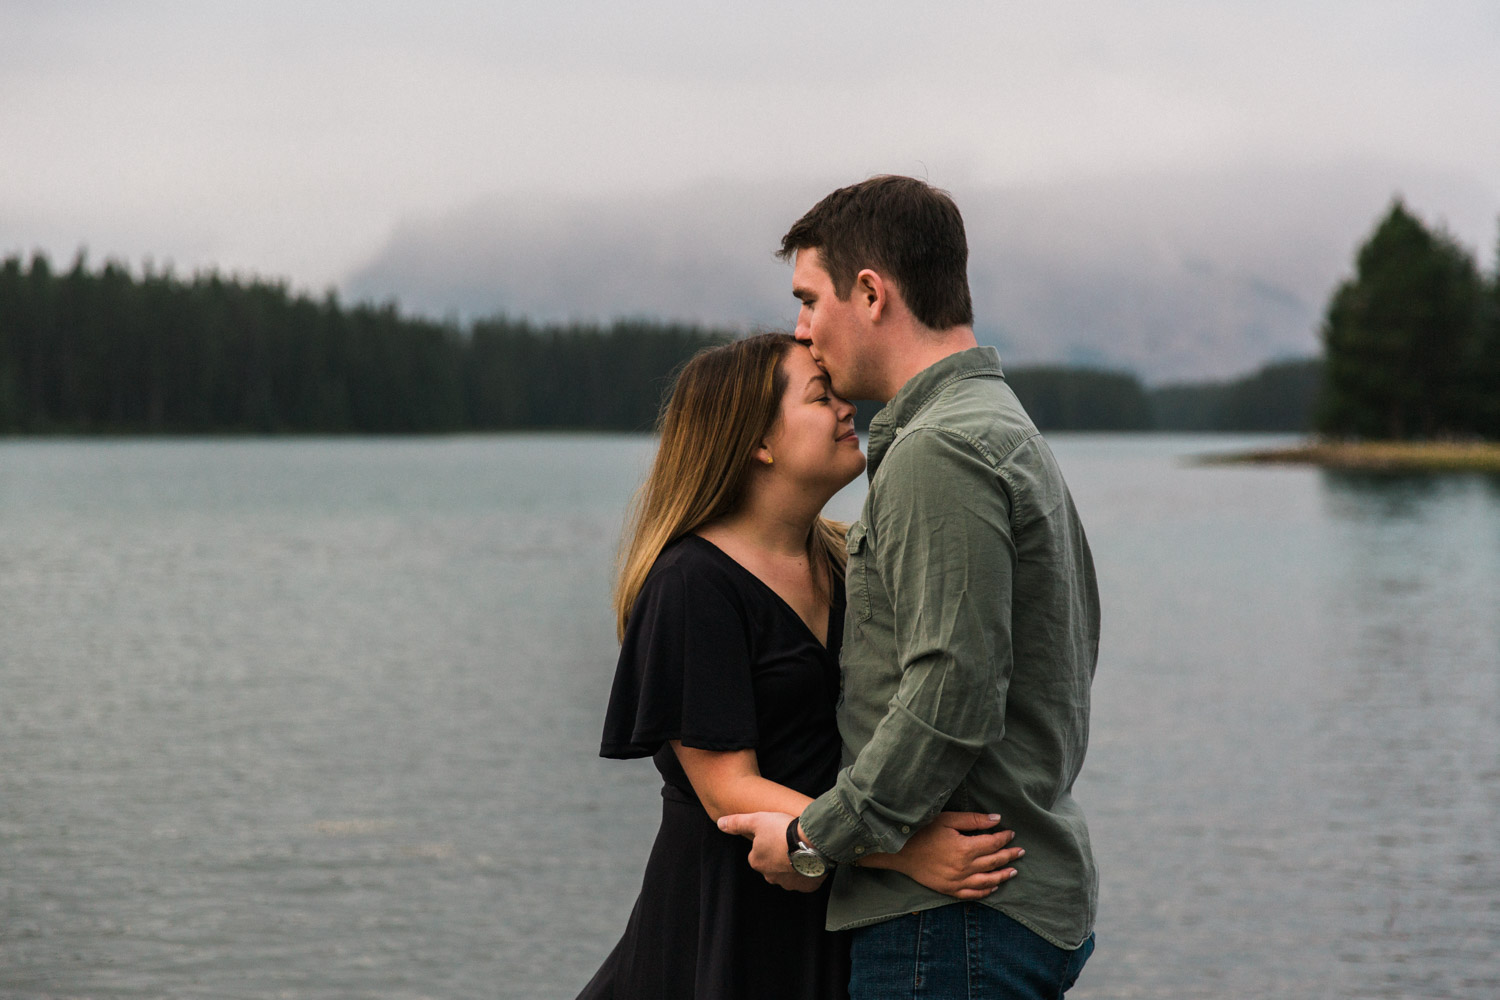 Camping on Vacation Engagement Photographer Jennie Guenard Photography